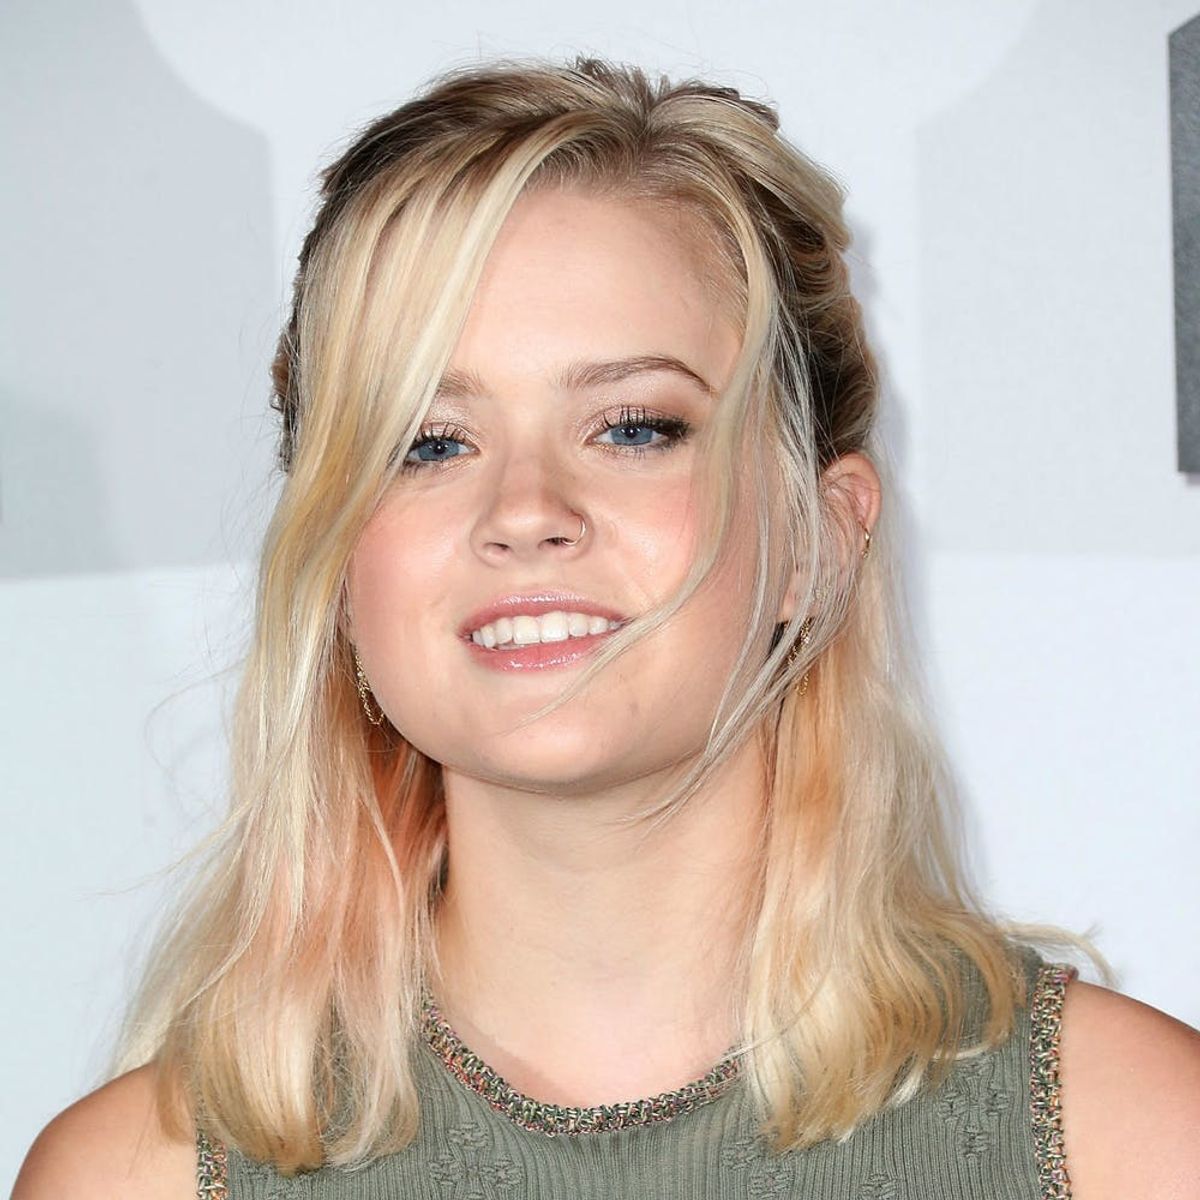 Reese Witherspoon’s Lookalike Daughter Ava Just Owned Her First Solo Red Carpet